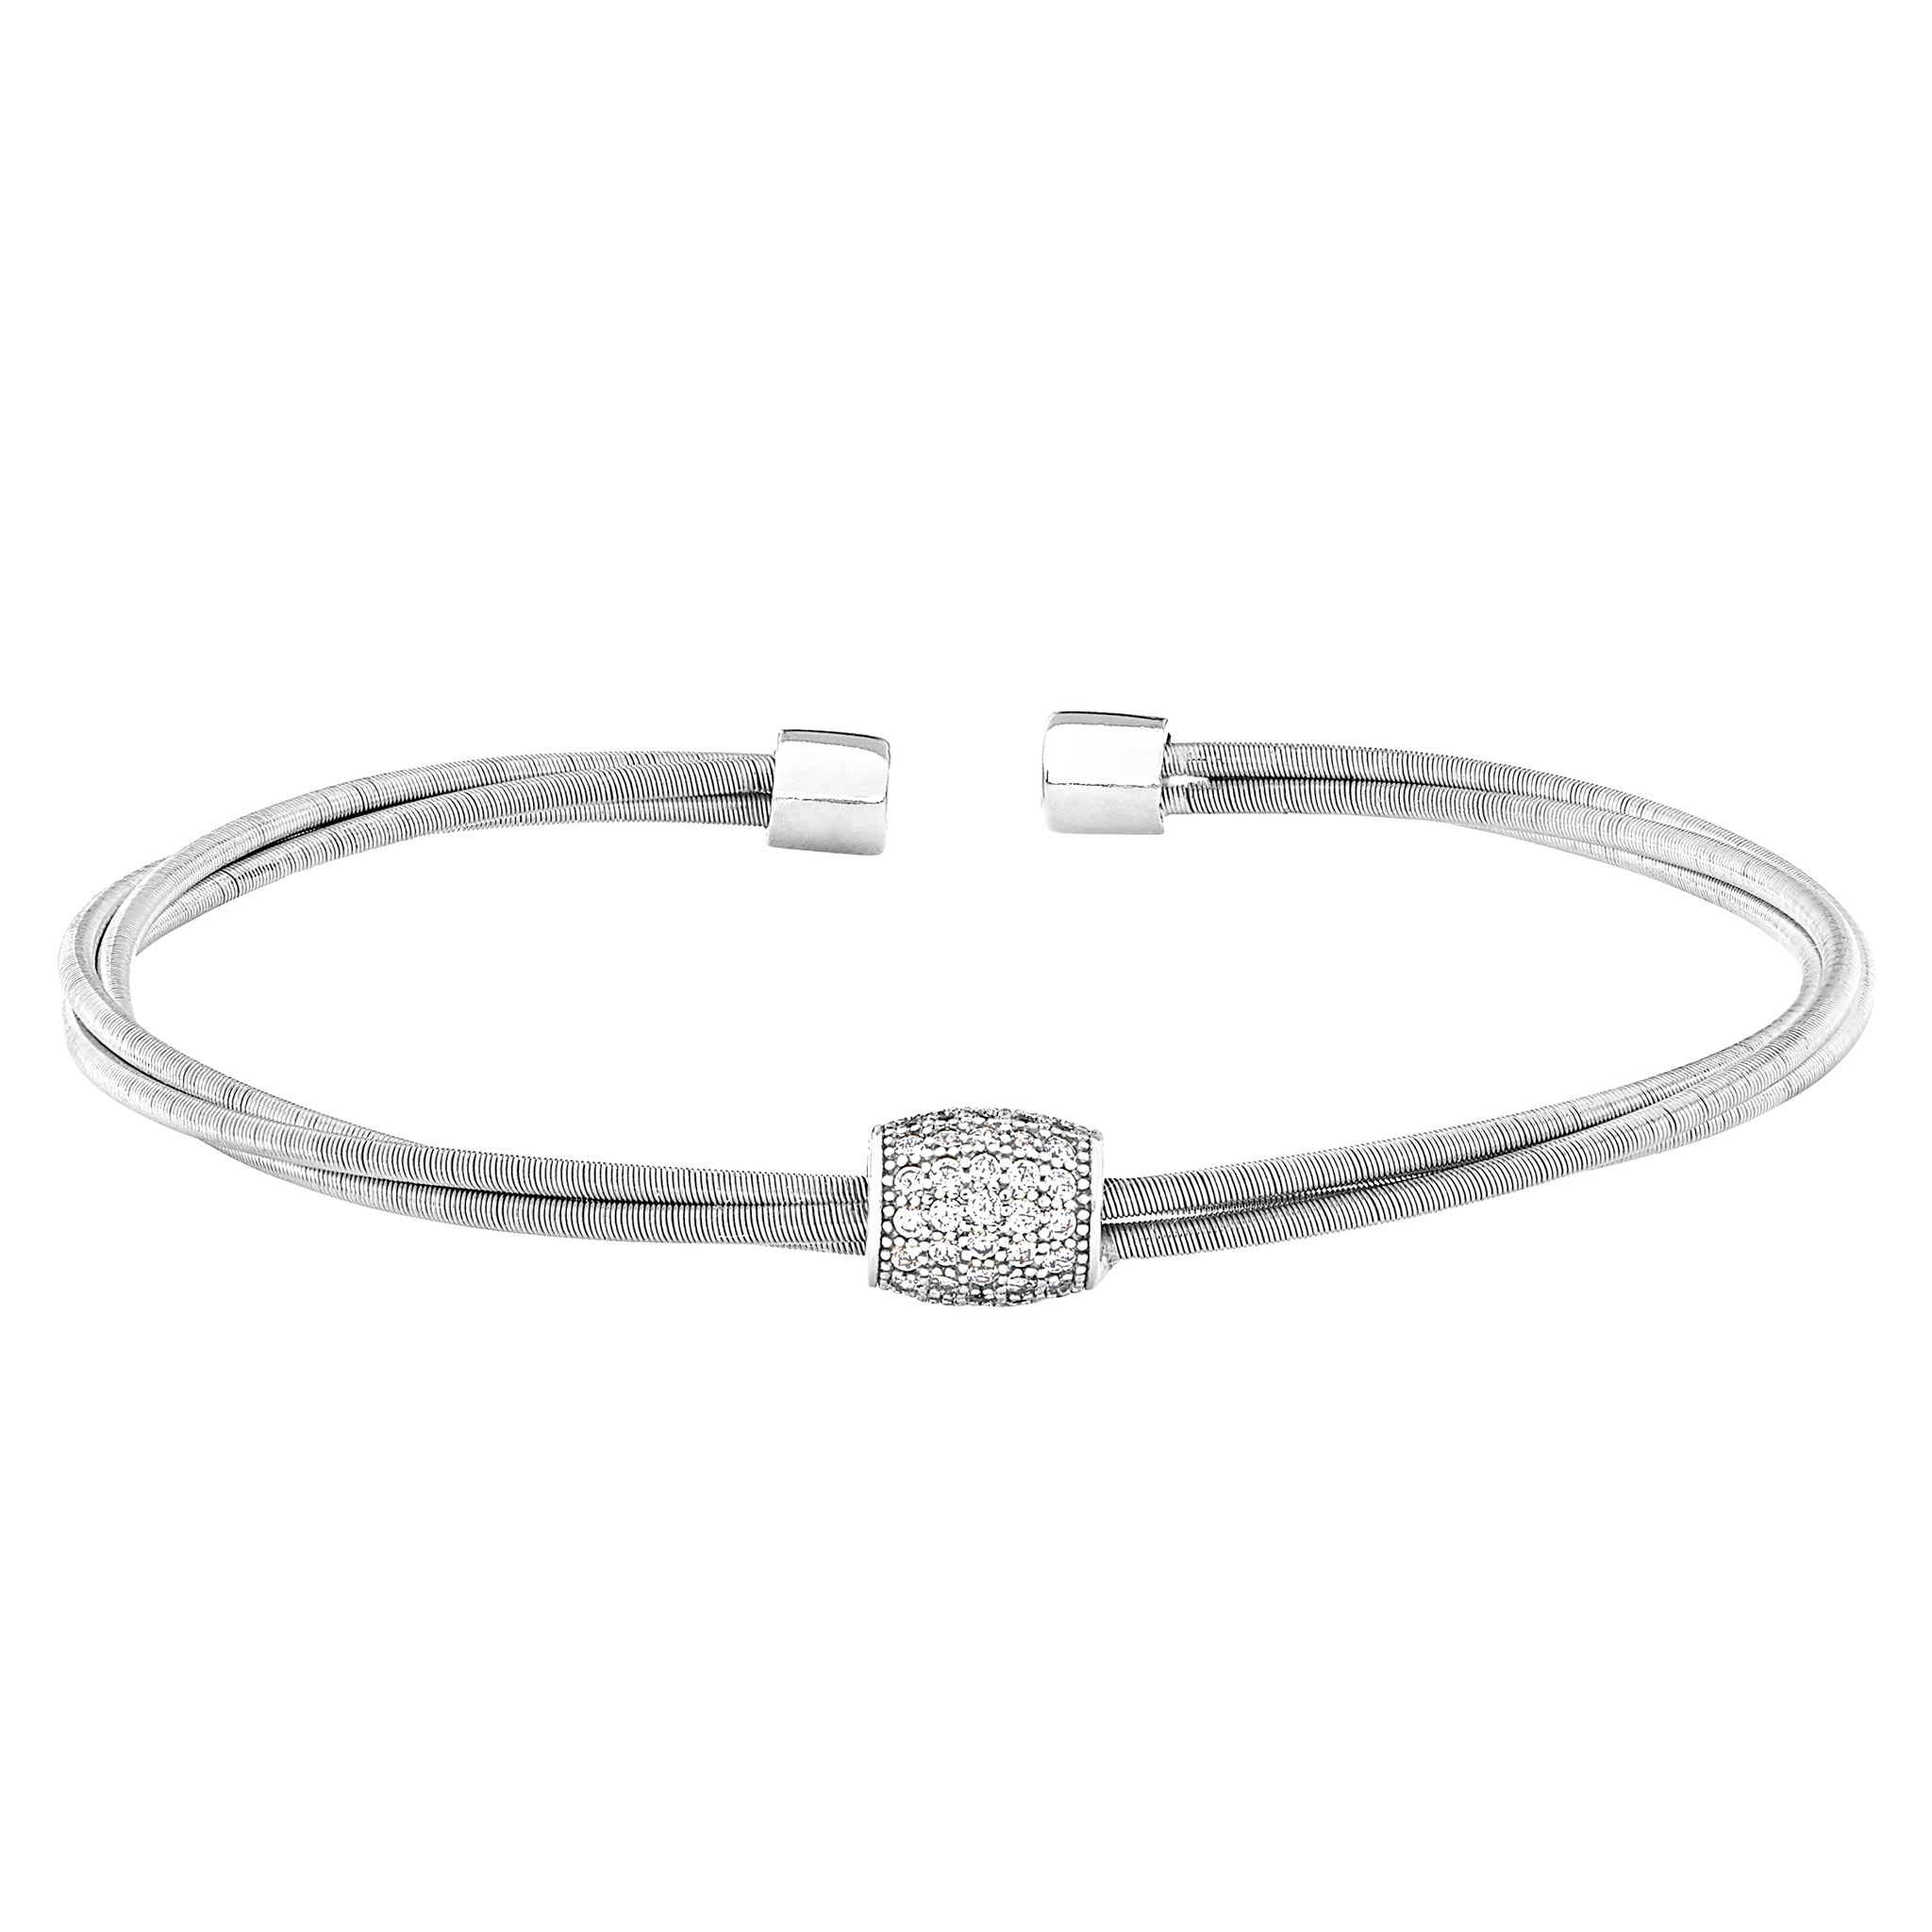 Rhodium Finish Sterling Silver Three Cable Cuff Bracelet with Five Row Barrel